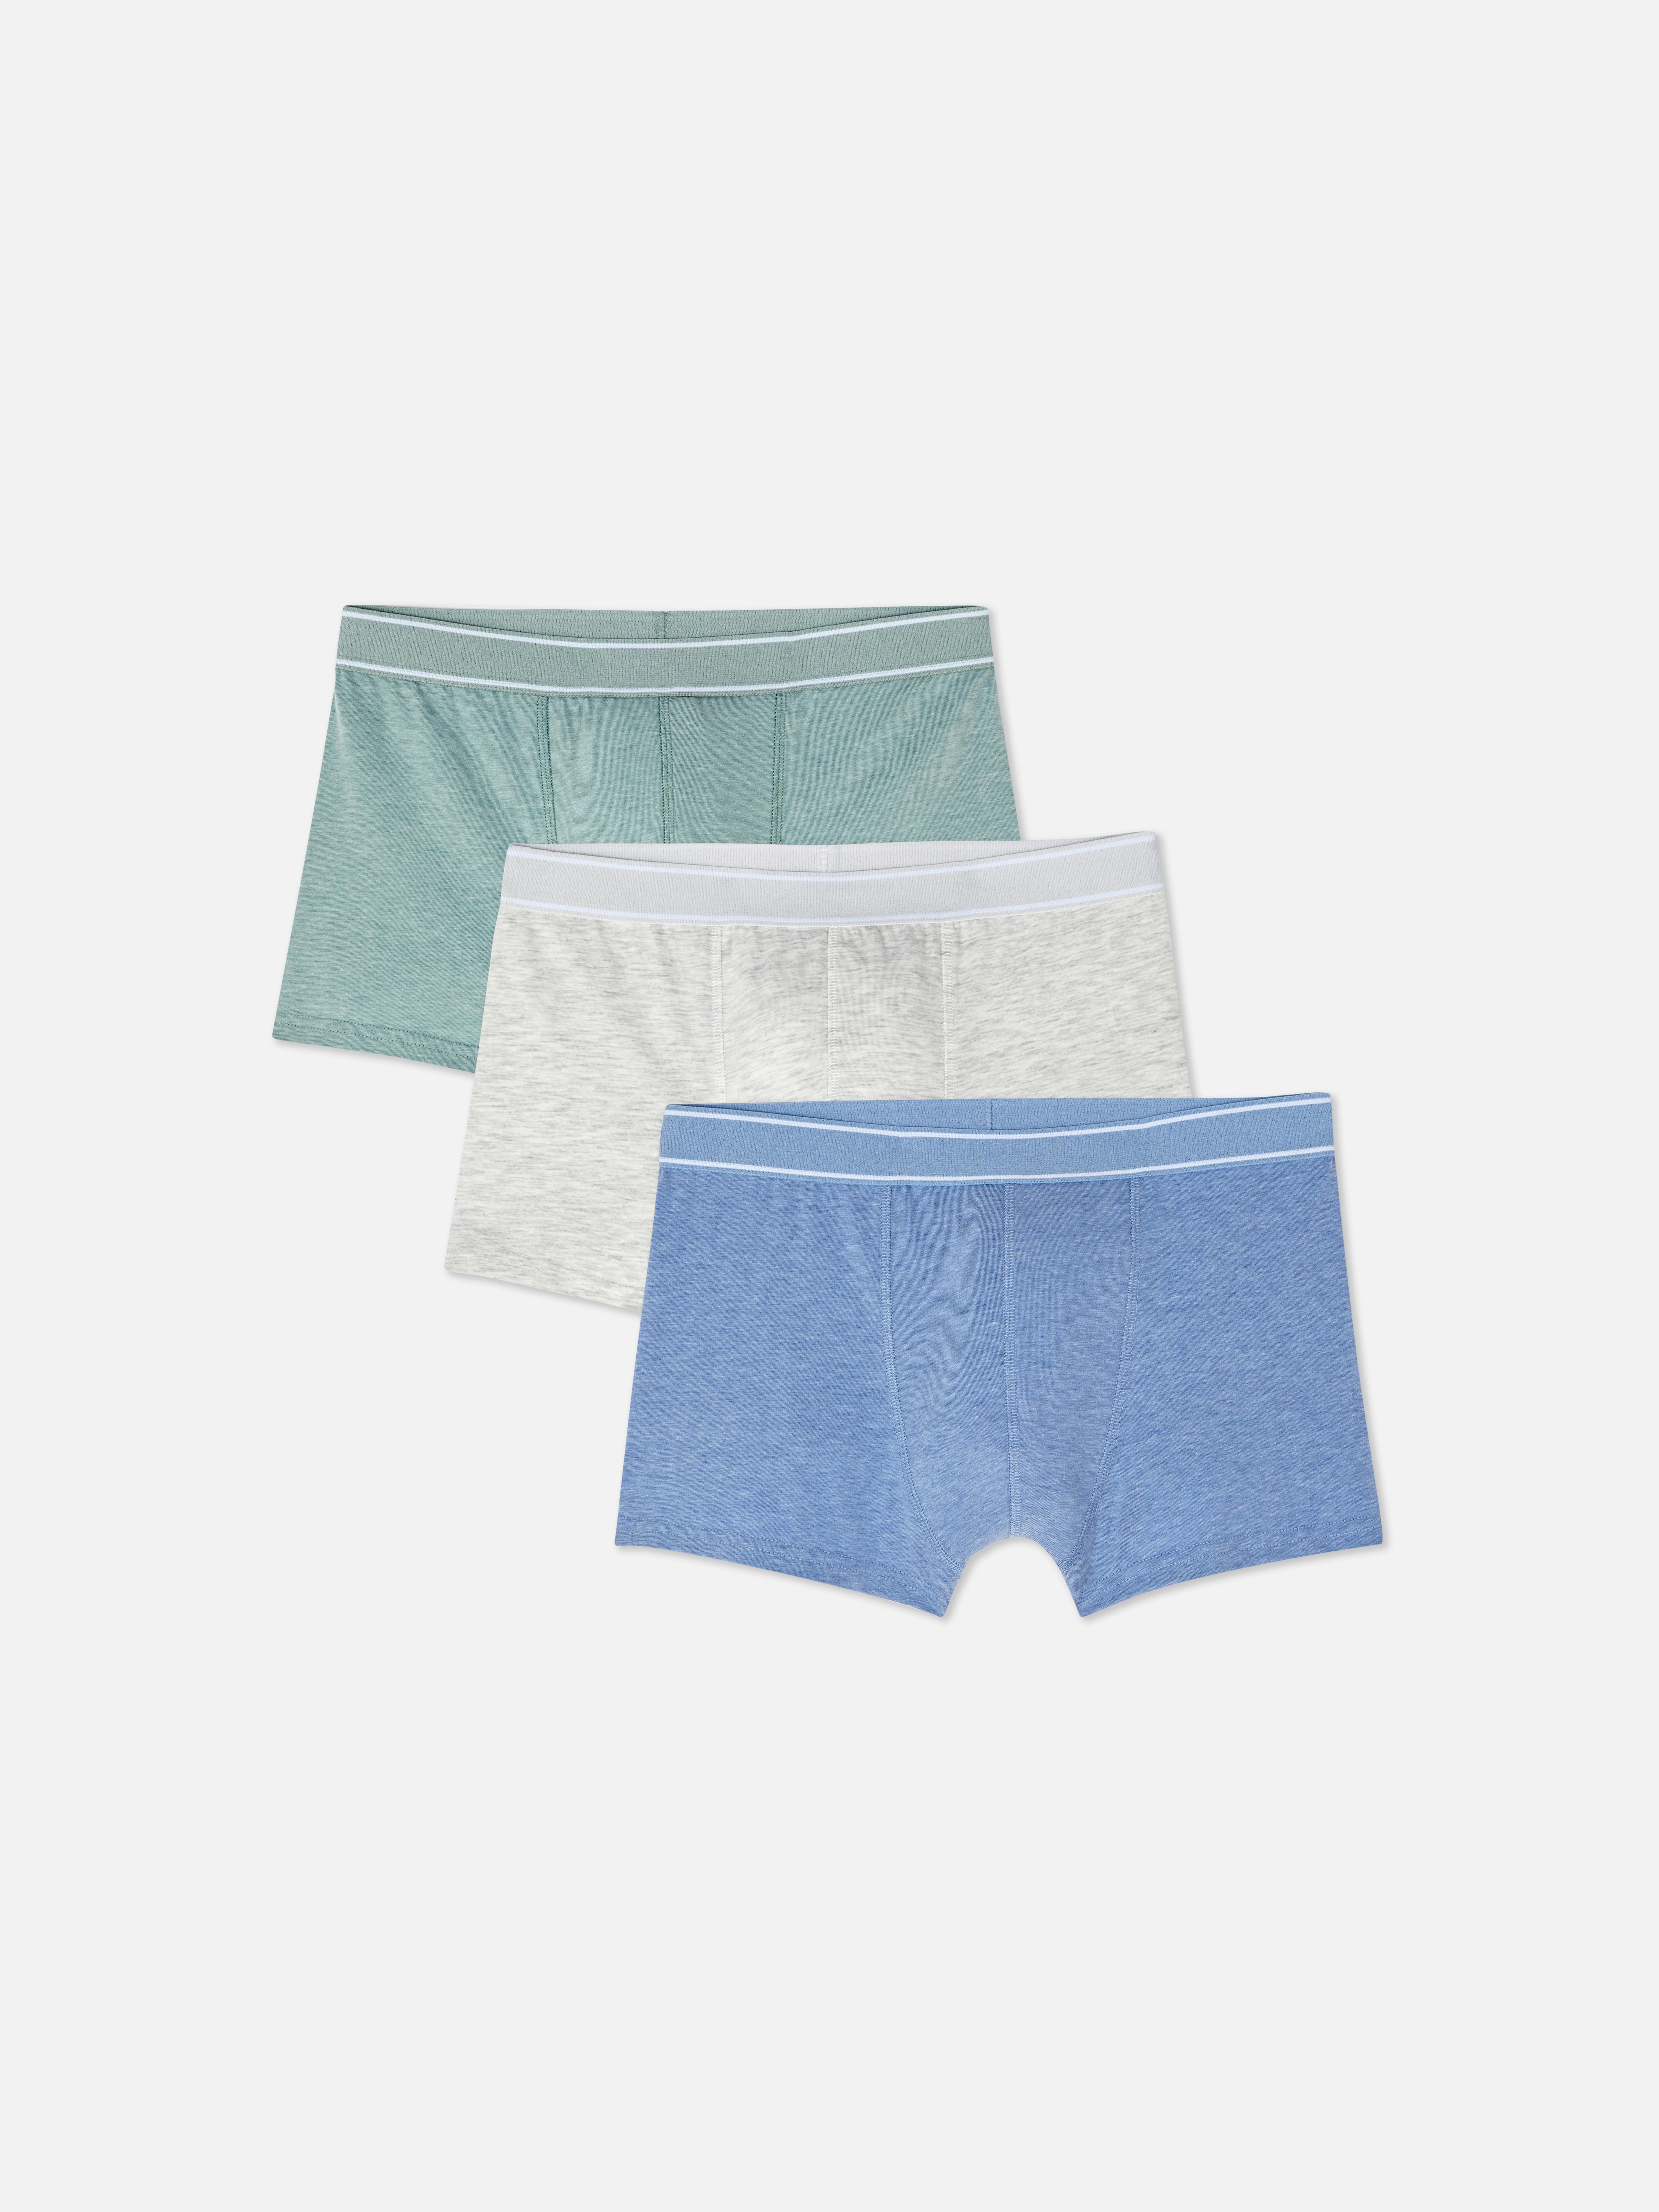  Tiny Boxers - small cotton boxer briefs, 3-pack Aqua Blue:  Clothing, Shoes & Jewelry